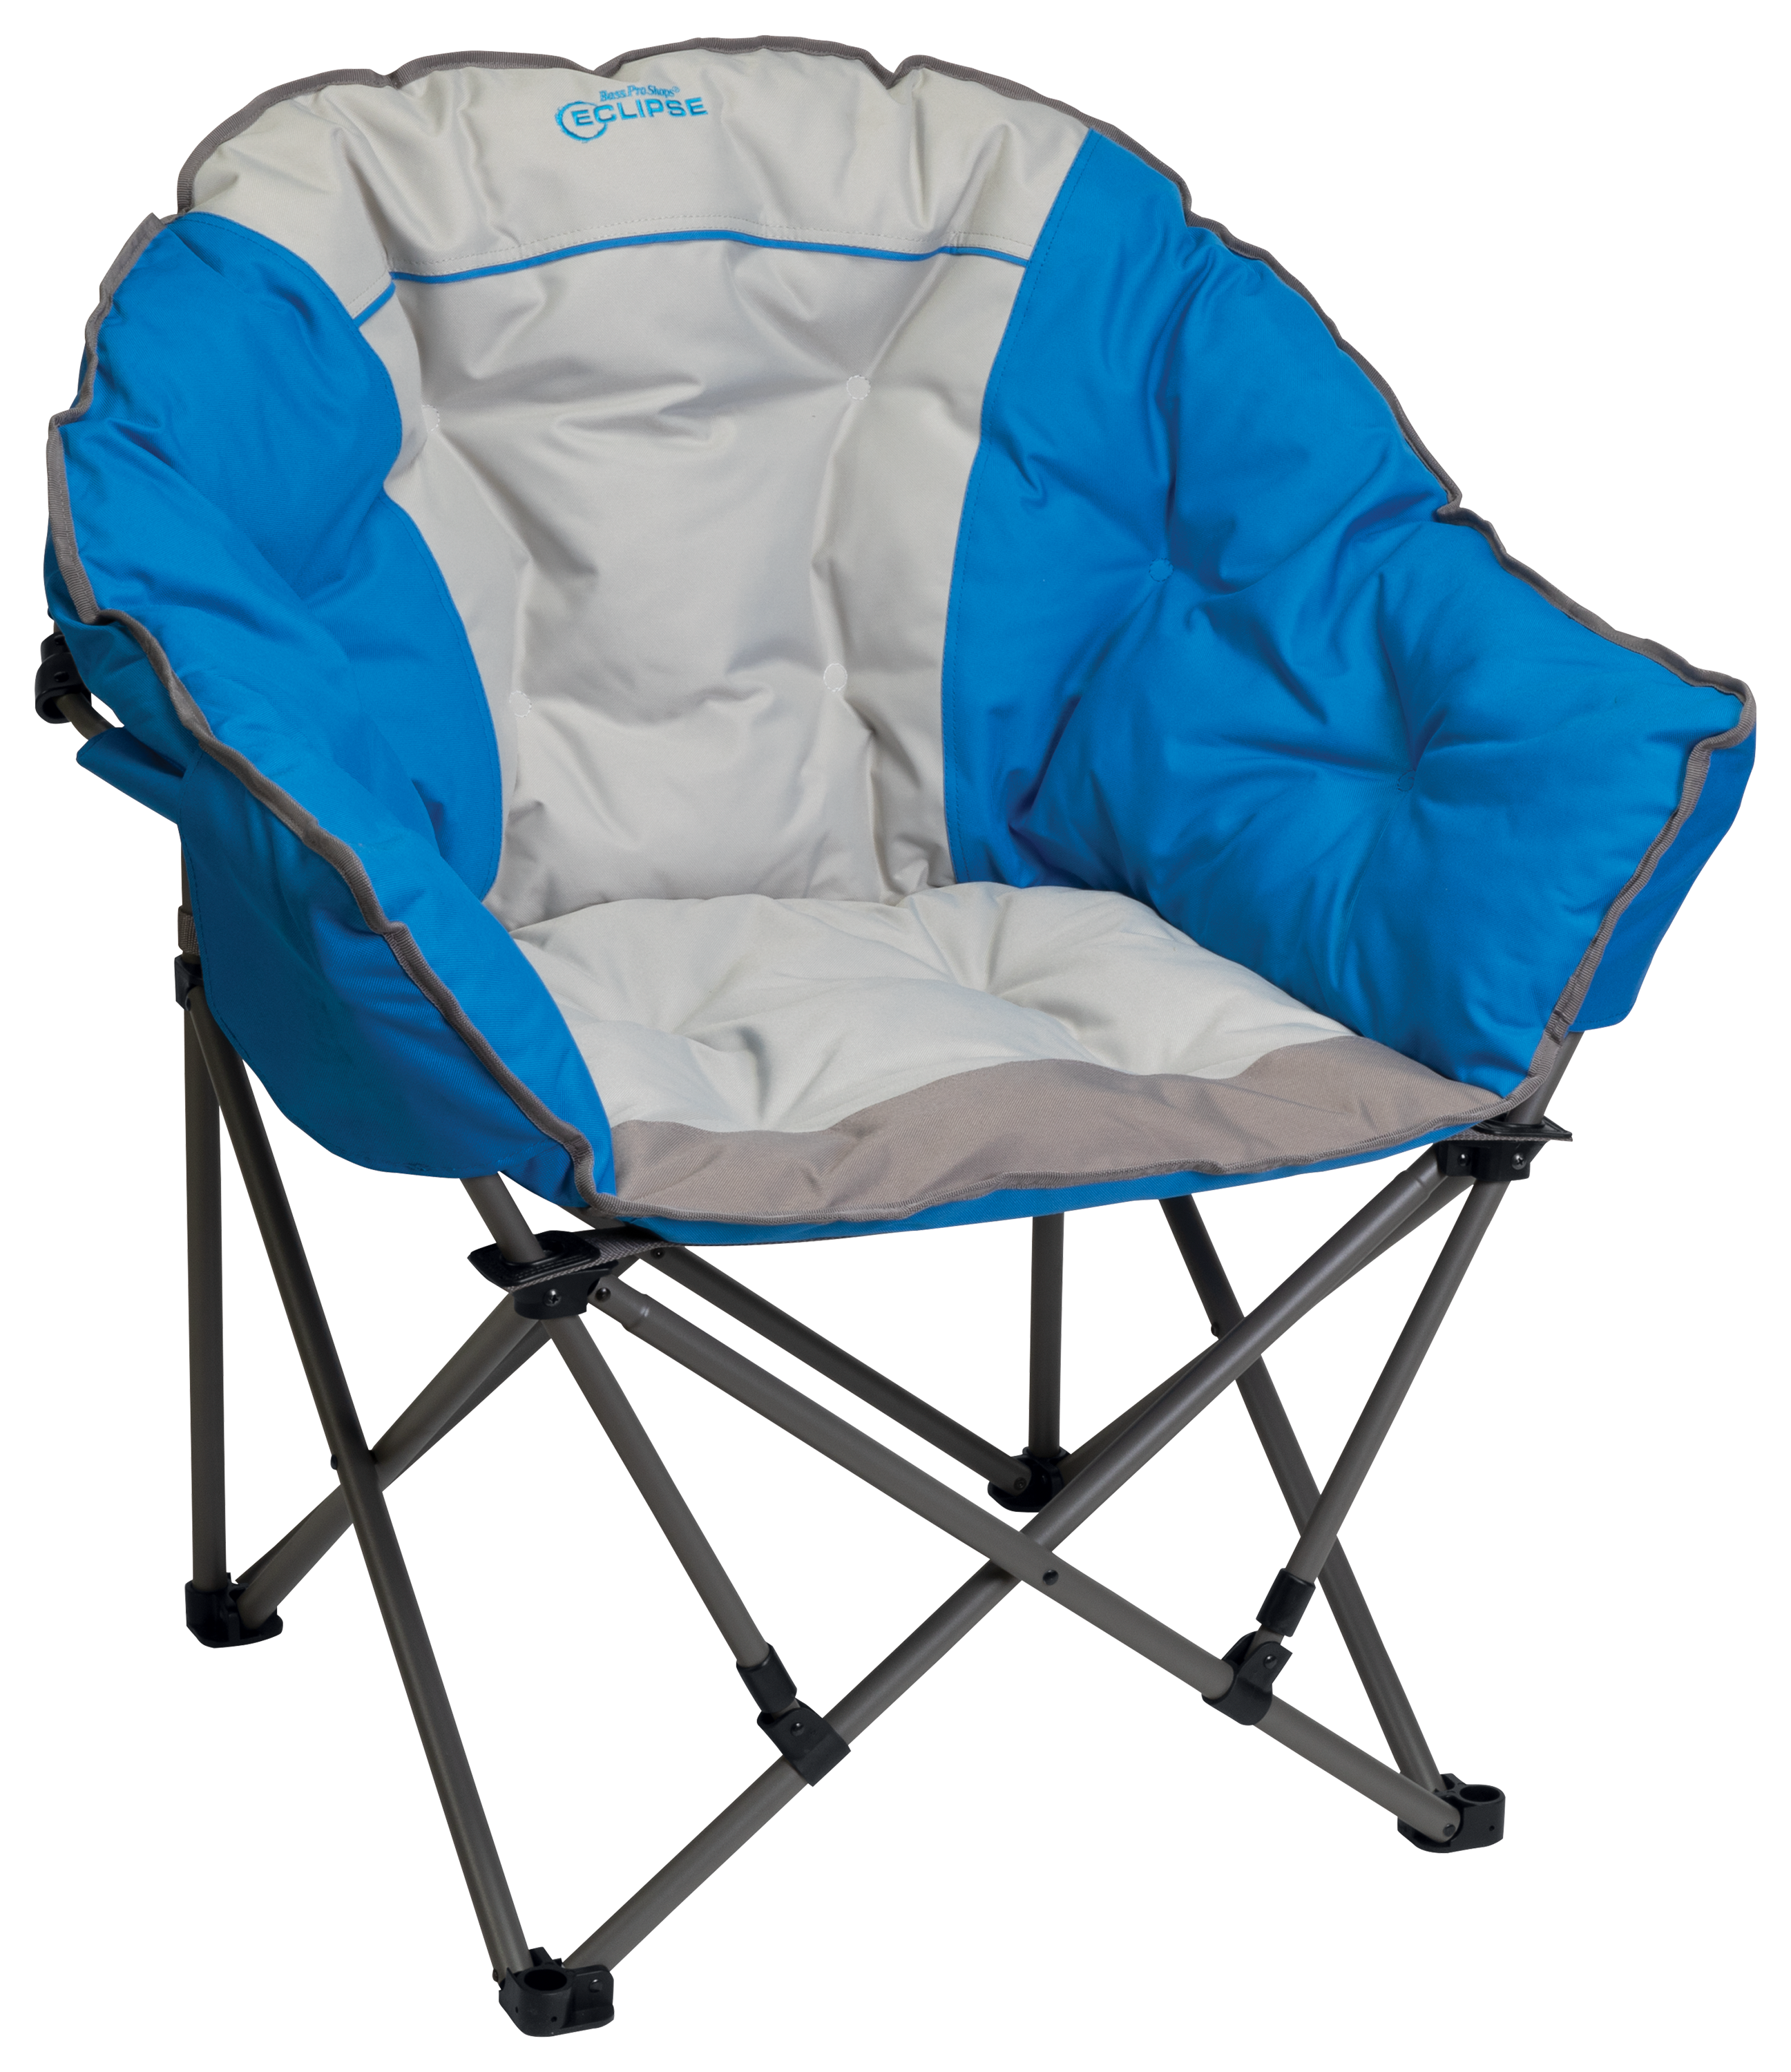 Bass Pro Shops Eclipse XL Padded Club Chair